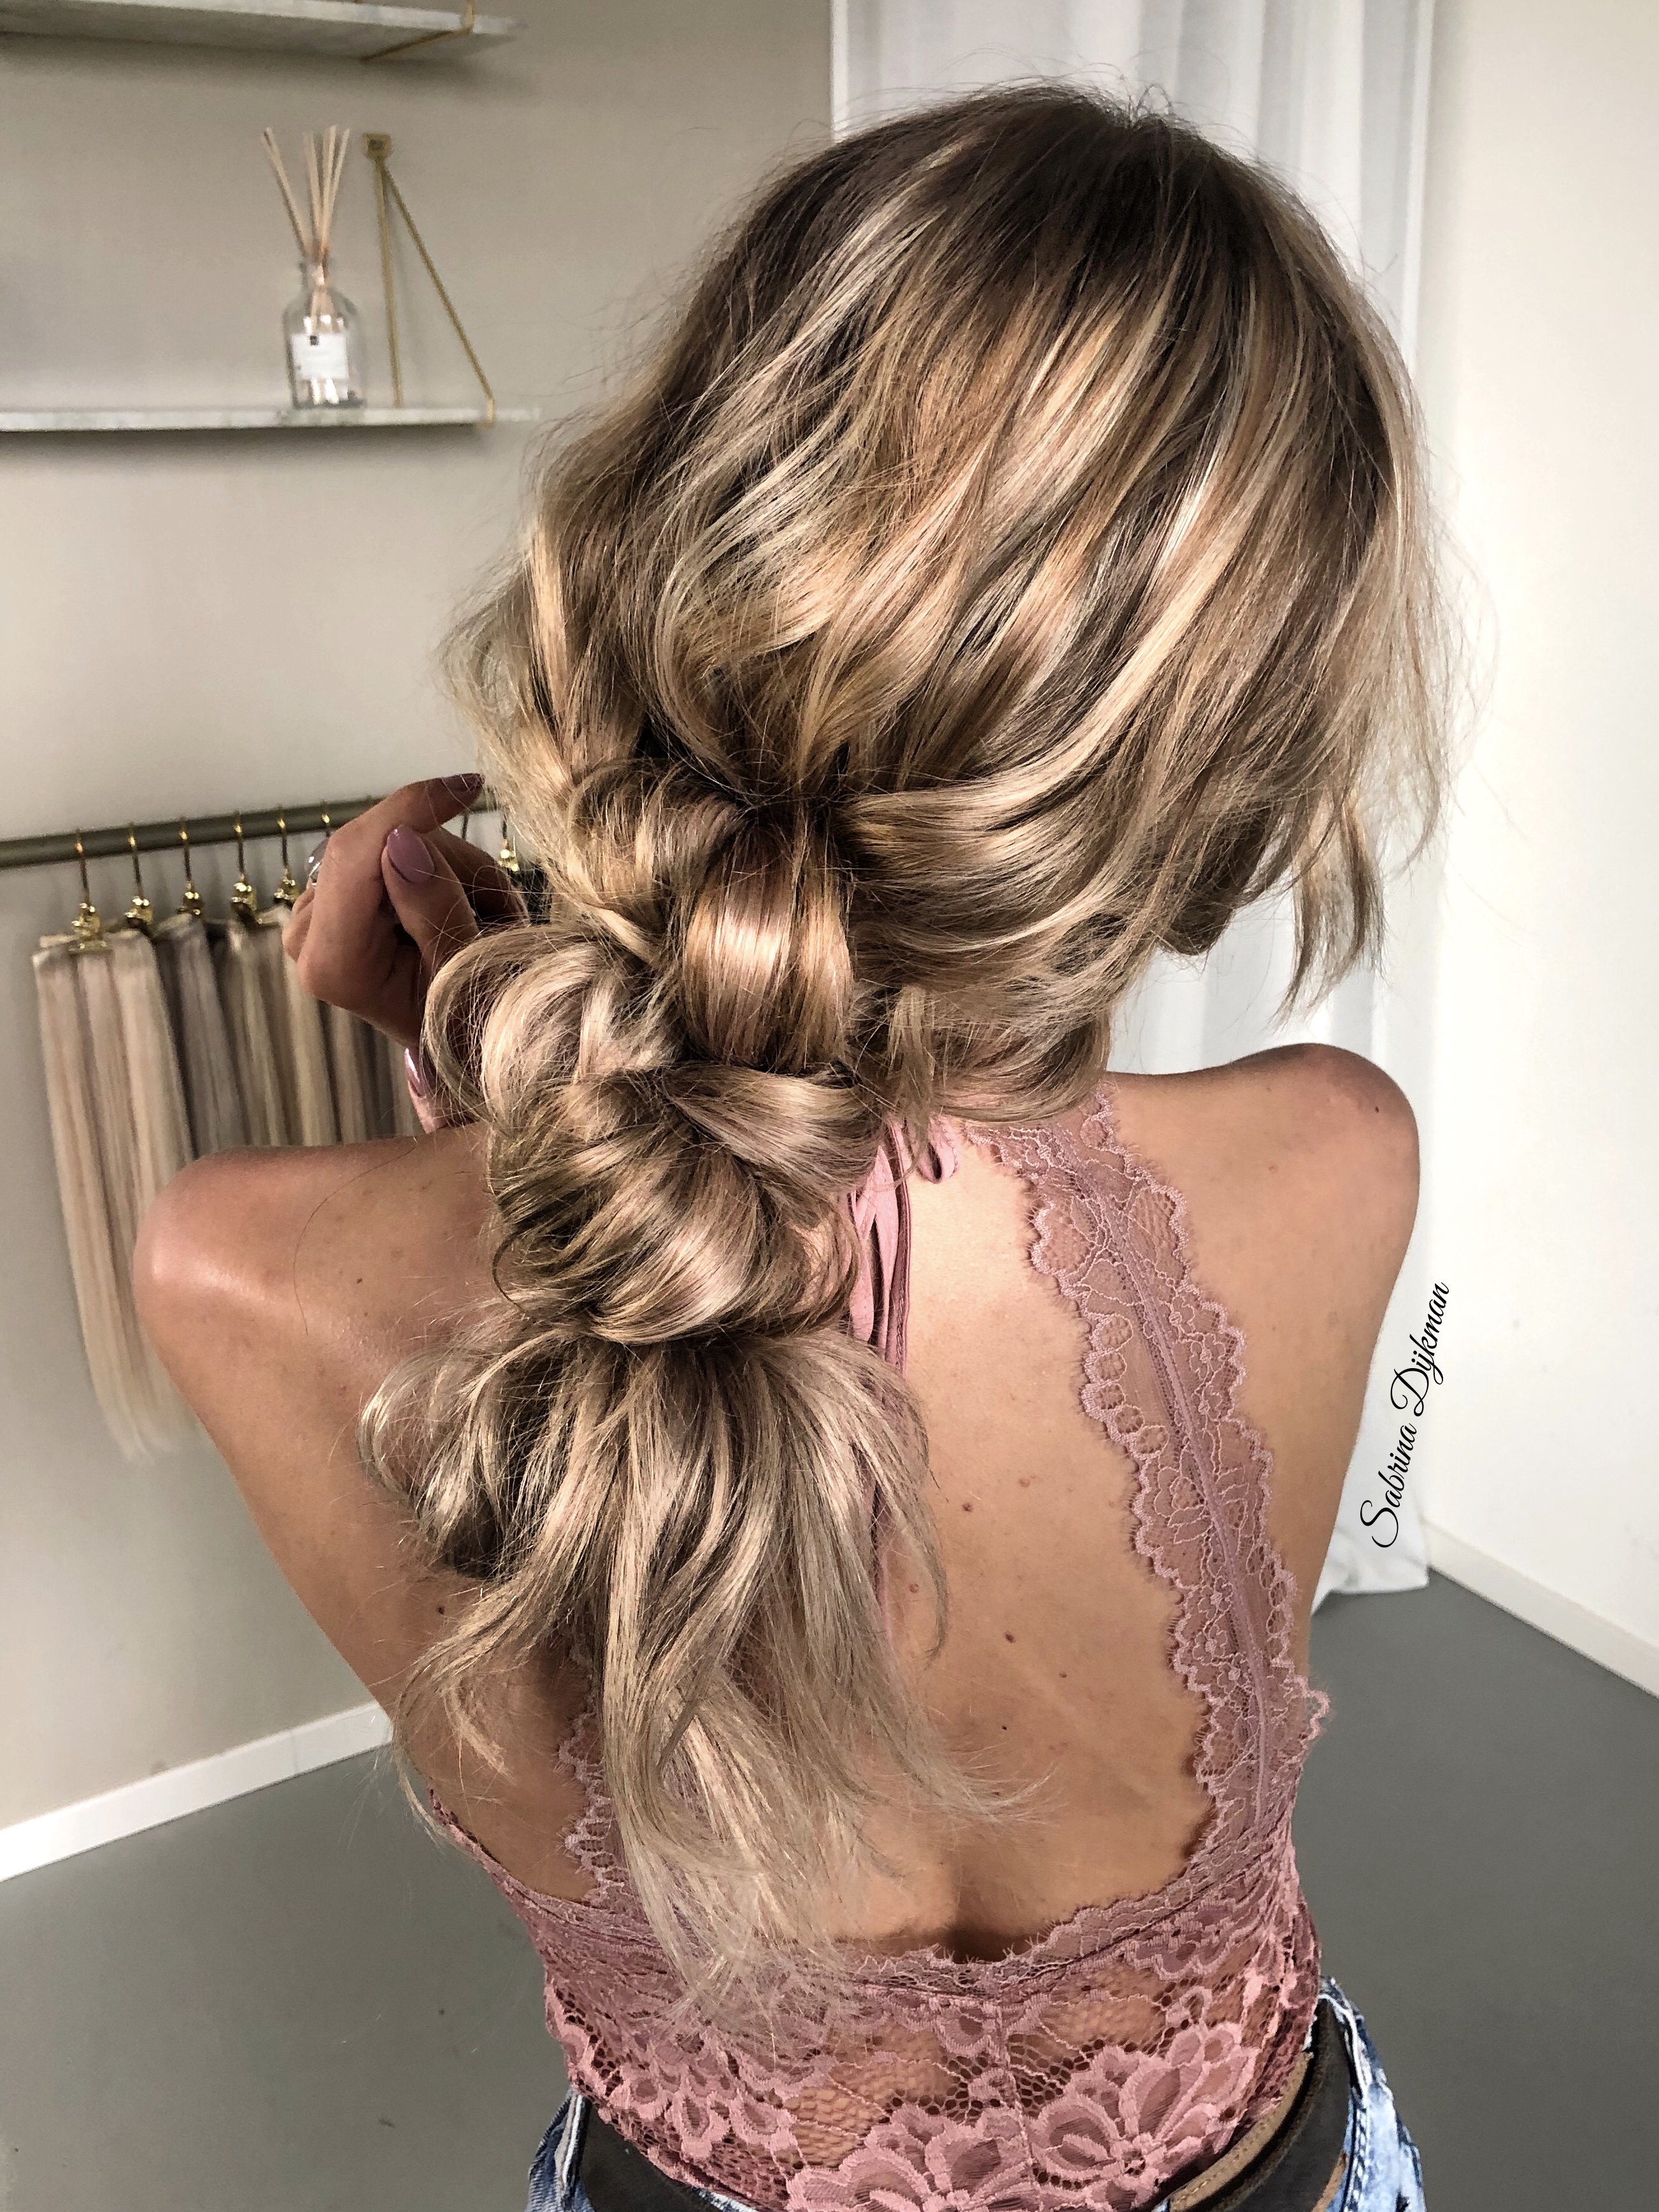 Boho Hairstyle with Knots